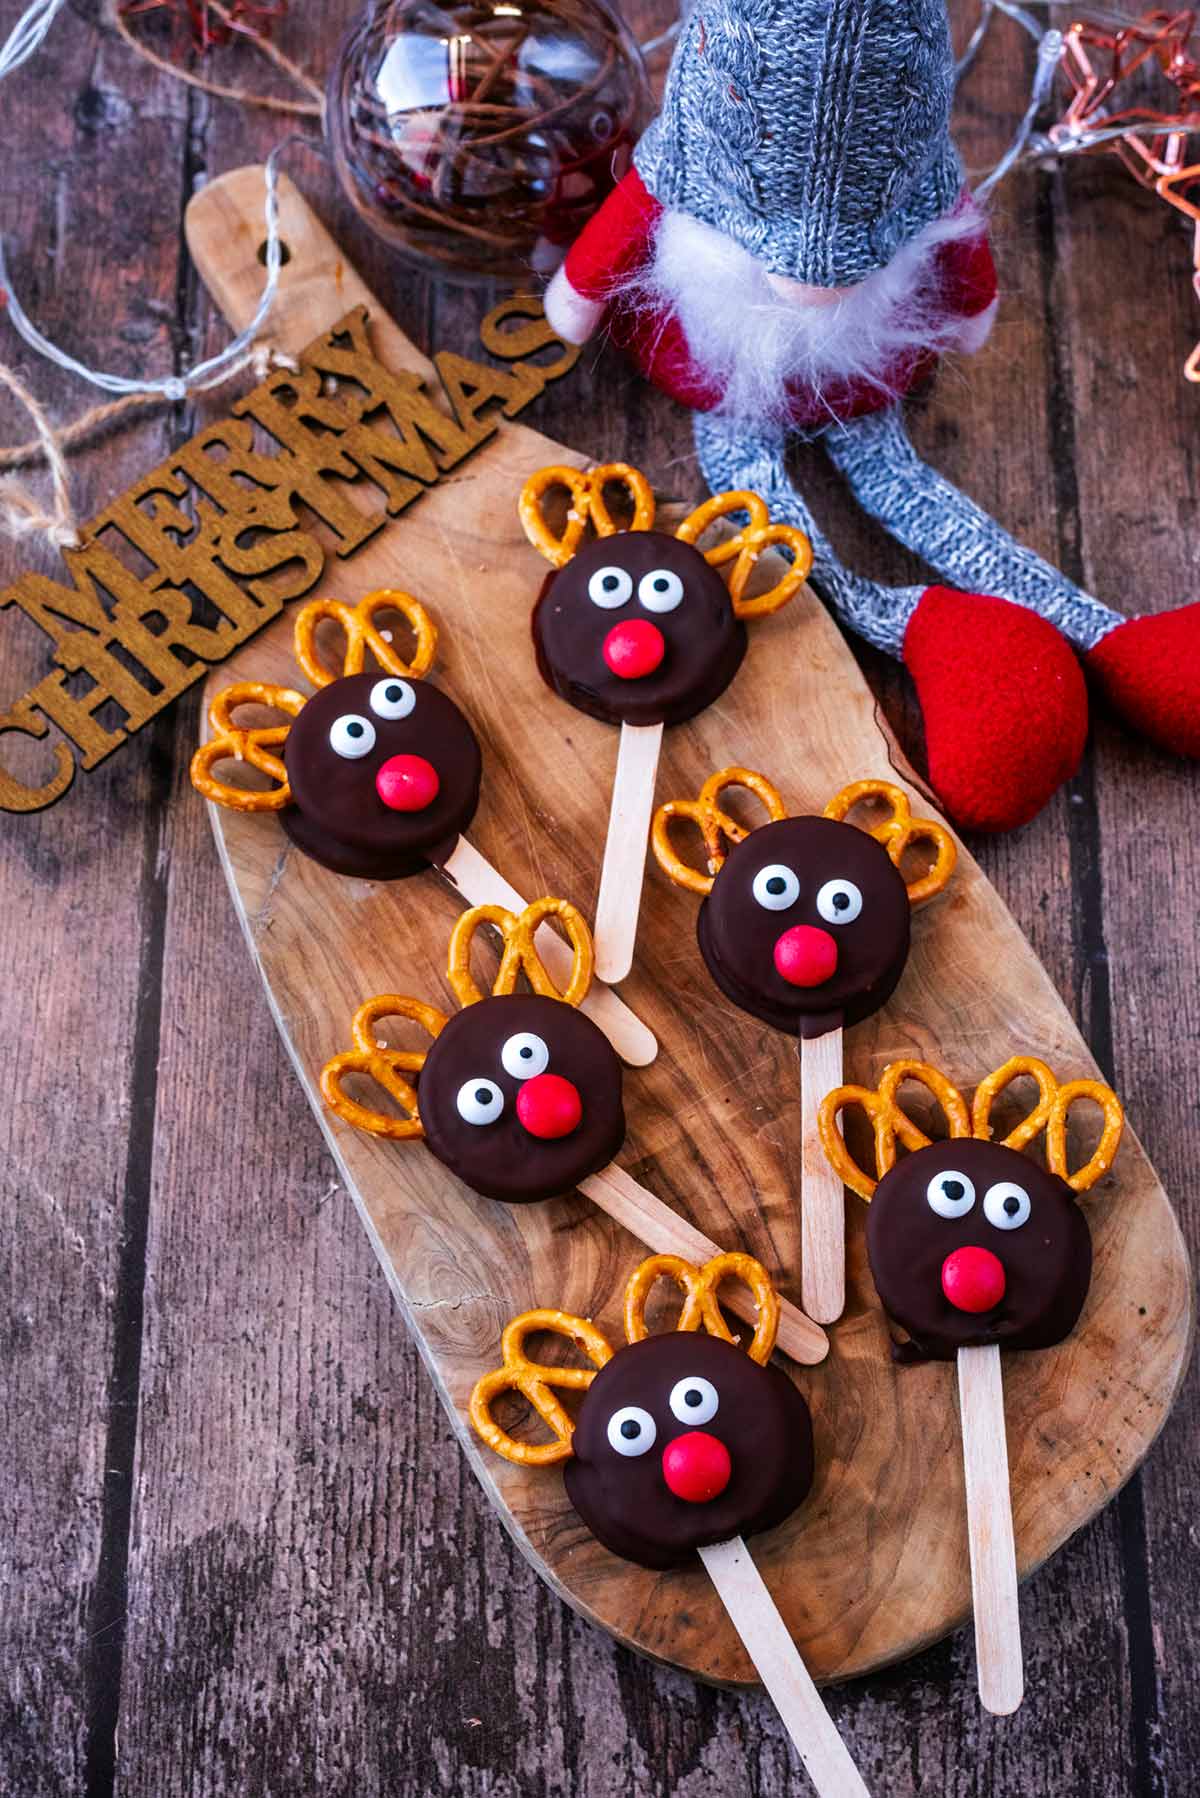 Reindeer oreos on a wooden board next to some Christmas decorations.